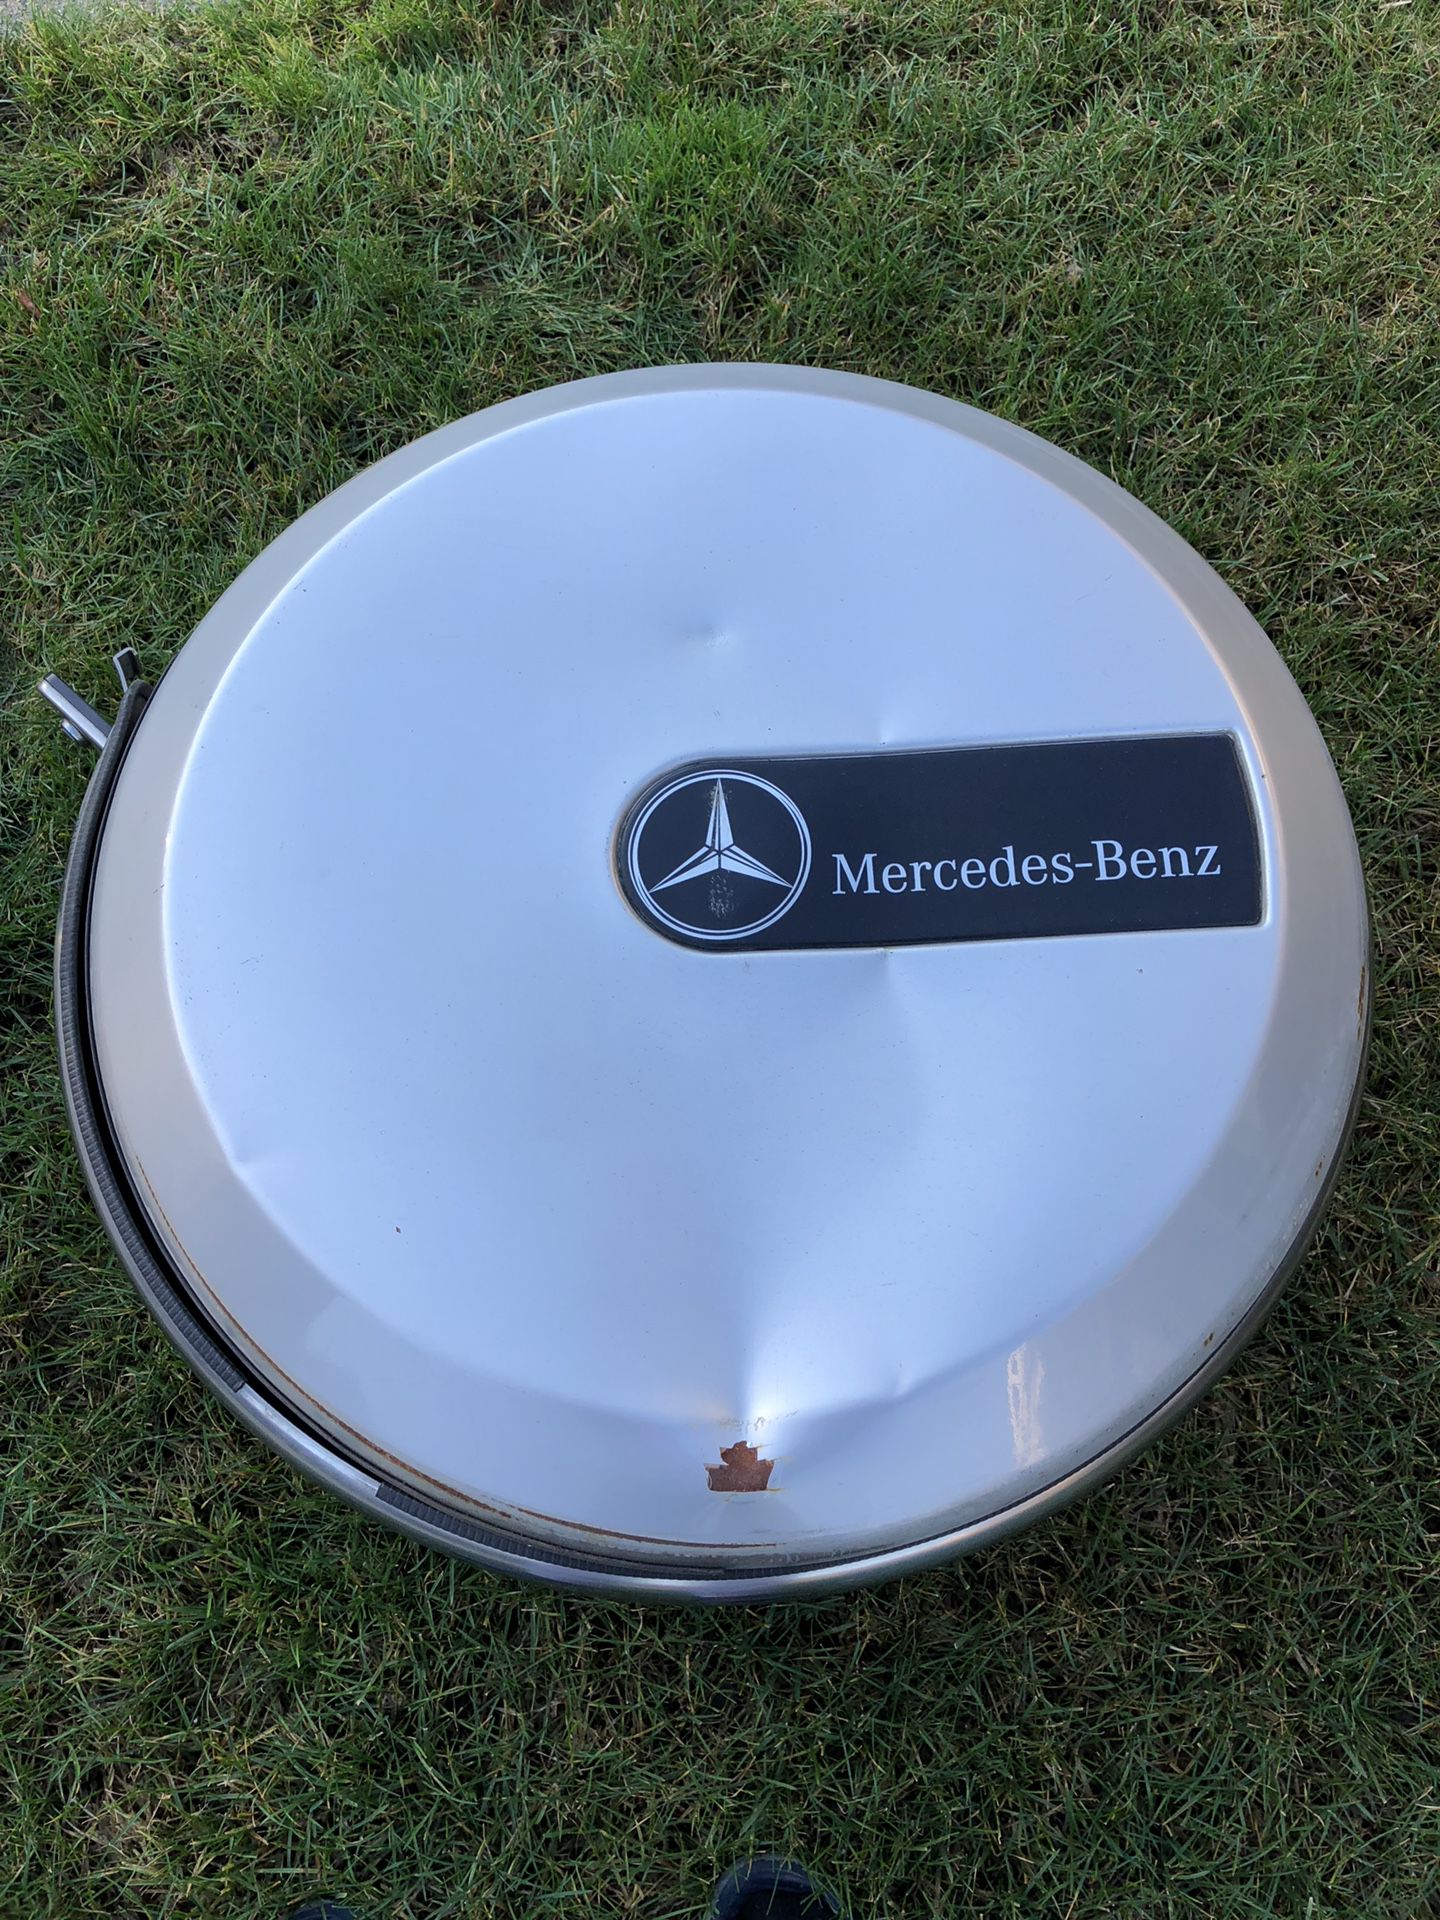 FREE Tire cover for Mercedes G500